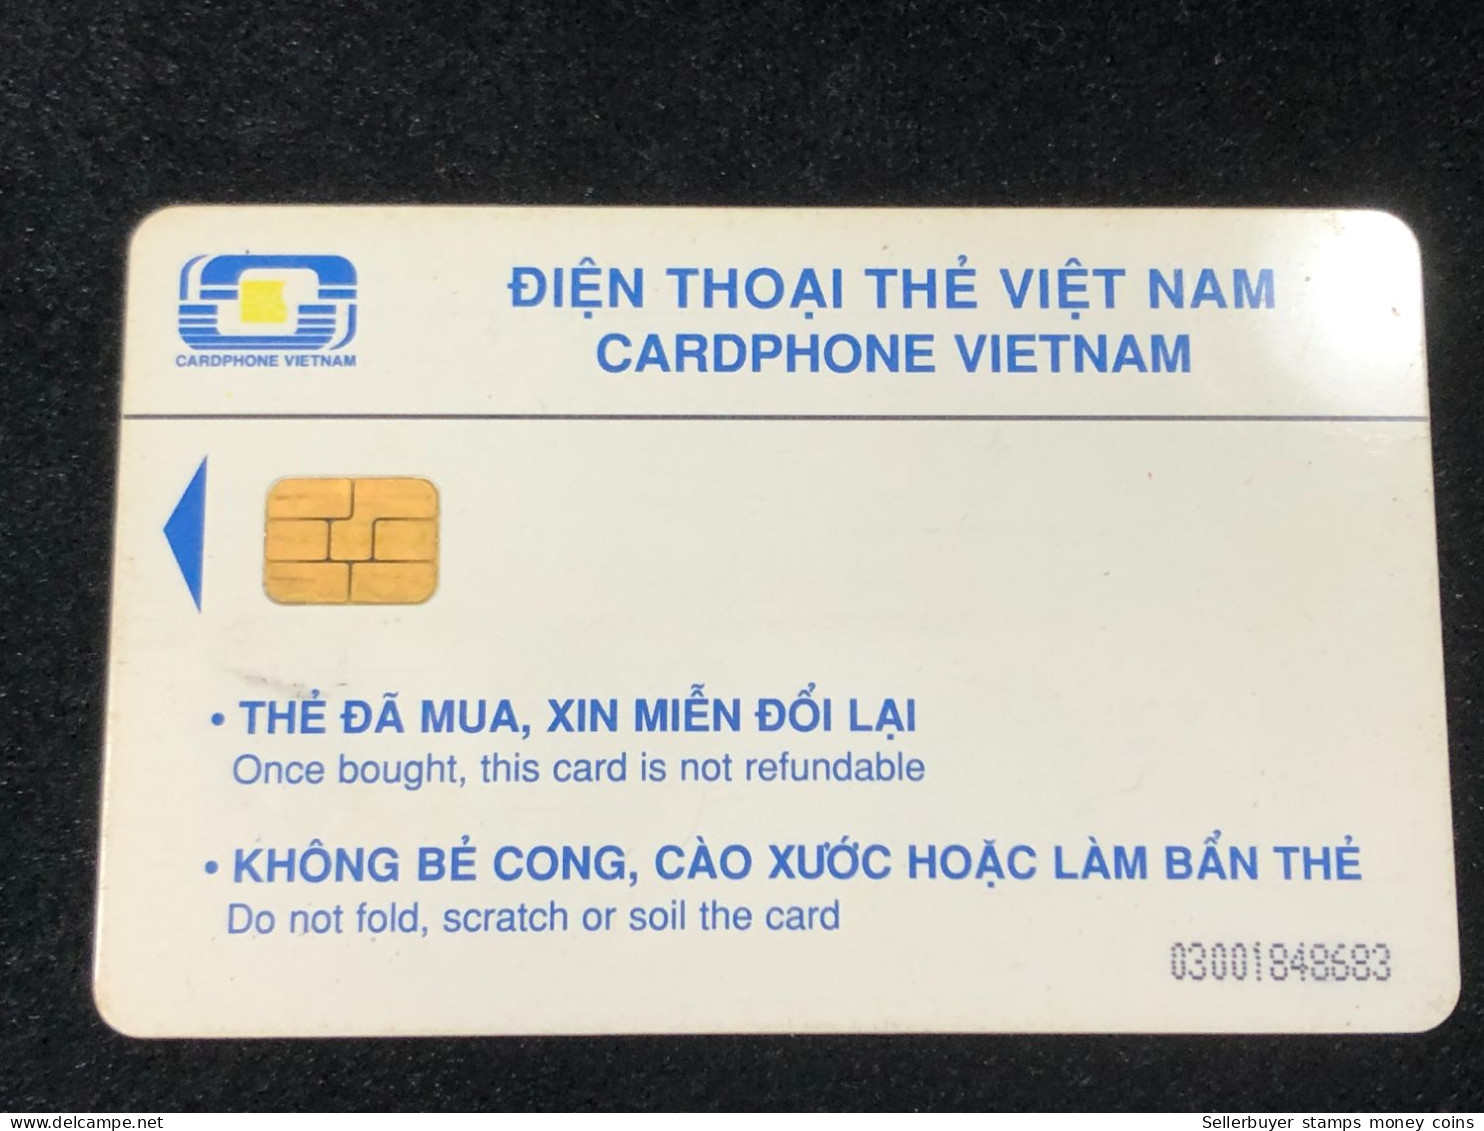 Vietnam This Is A Vietnamese Cardphone Card From 2001 And 2005(1260- 50 000dong)-1pcs - Vietnam